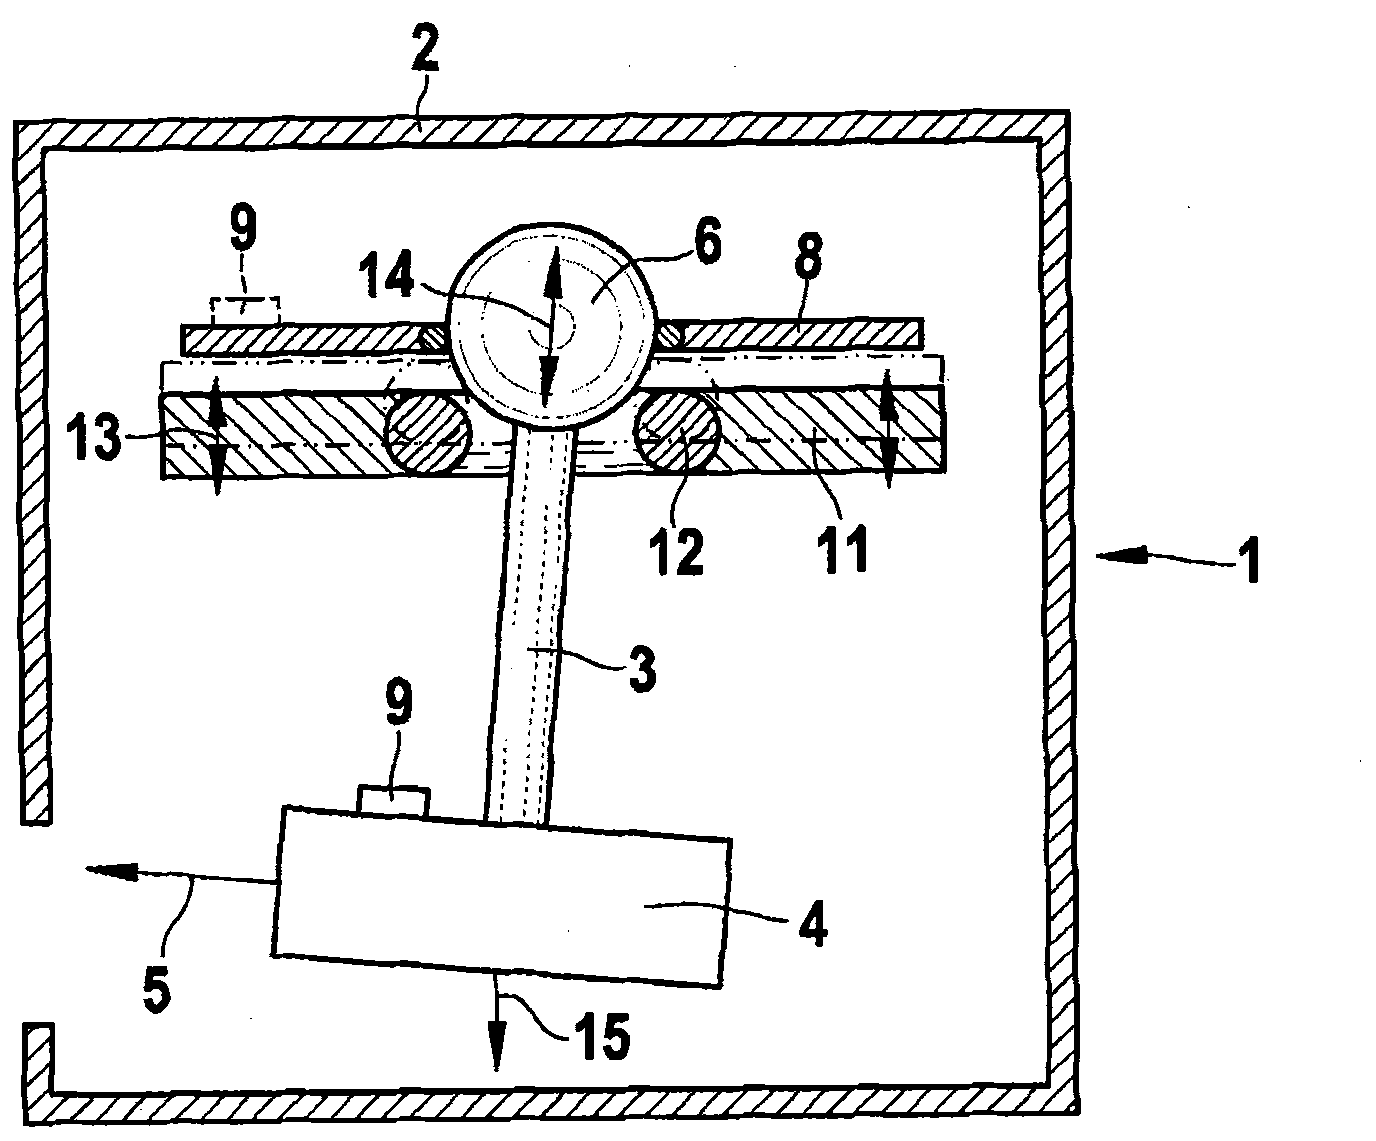 Marking and/or leveling device